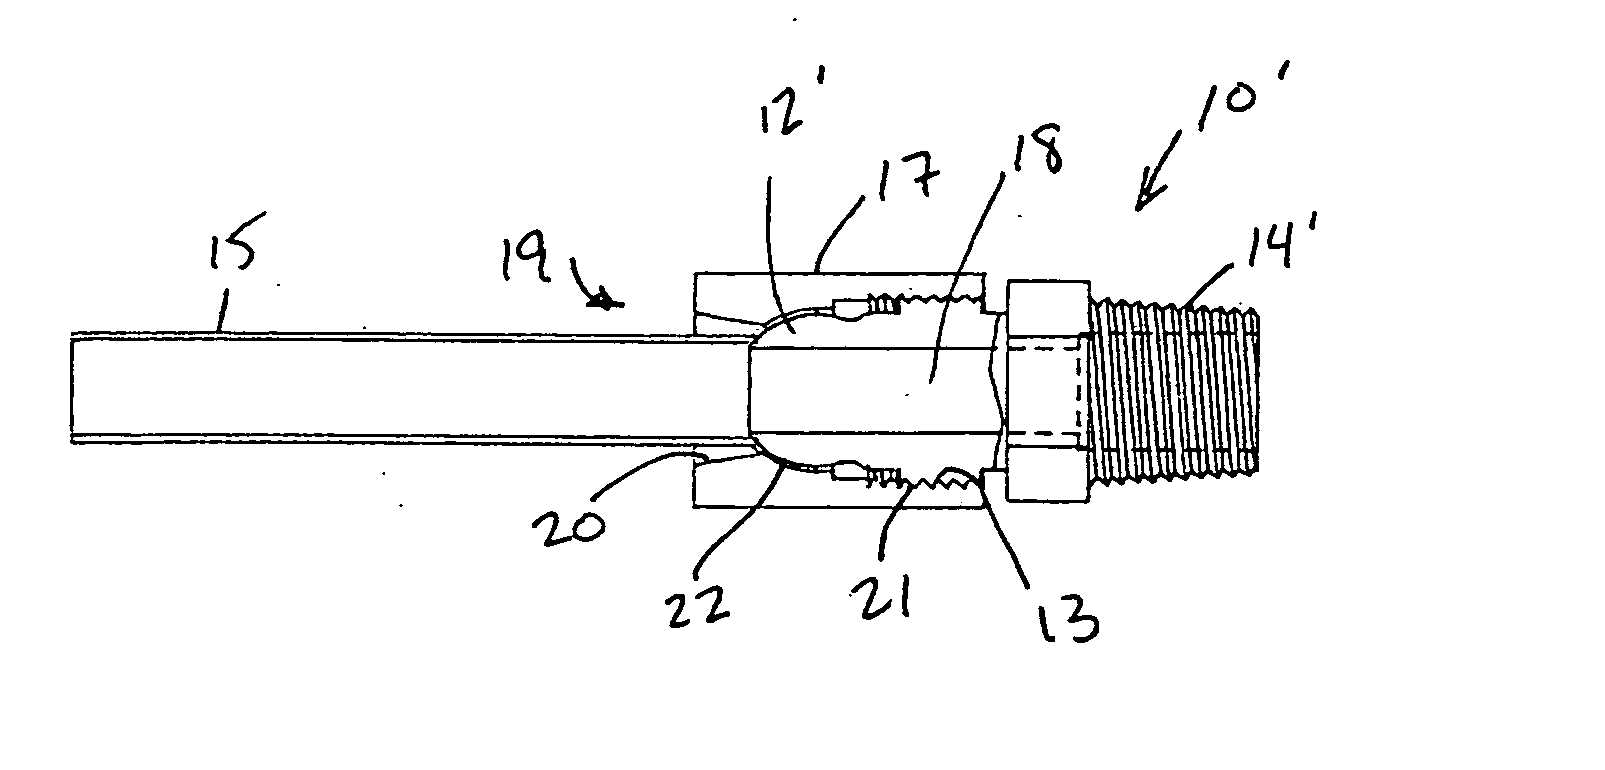 Process for forming a connector for tube and pipe fittings